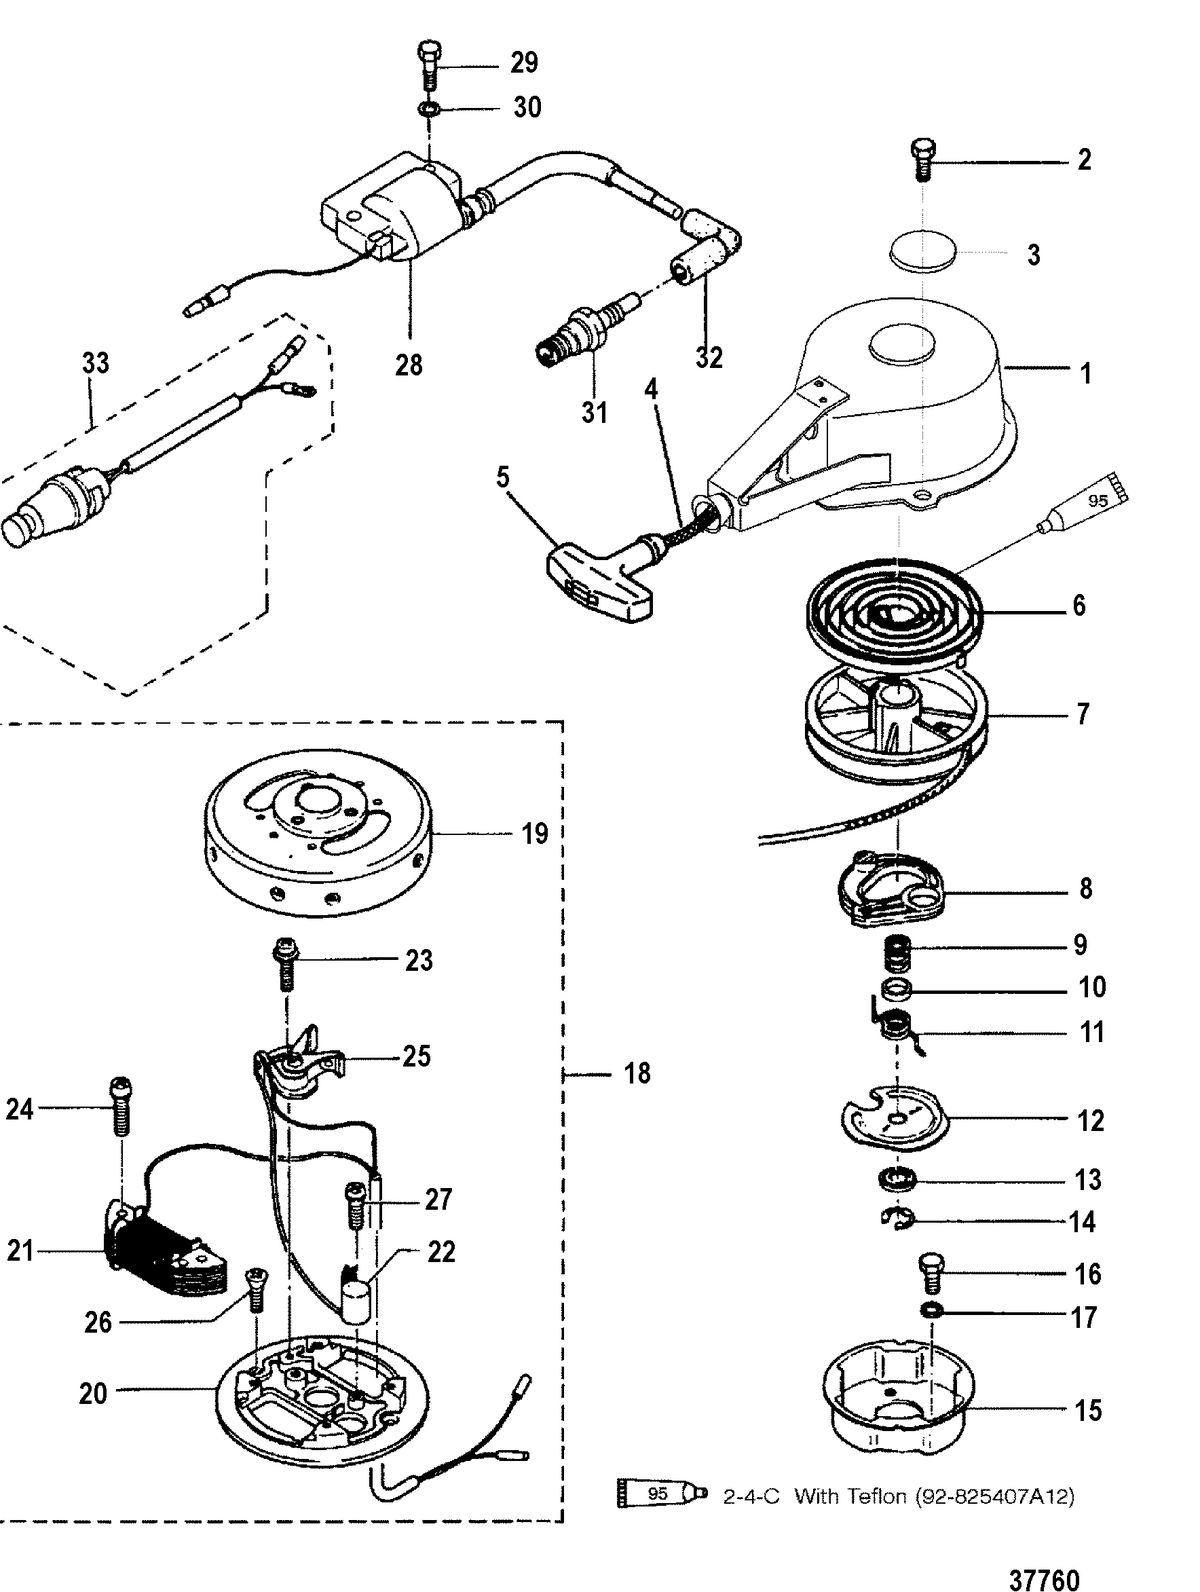 MERCURY/MARINER 2.5/3 HP(NON-SHIFT) RECOIL AND IGNITION COMPONENTS(BREAKER POINT IGNITION)